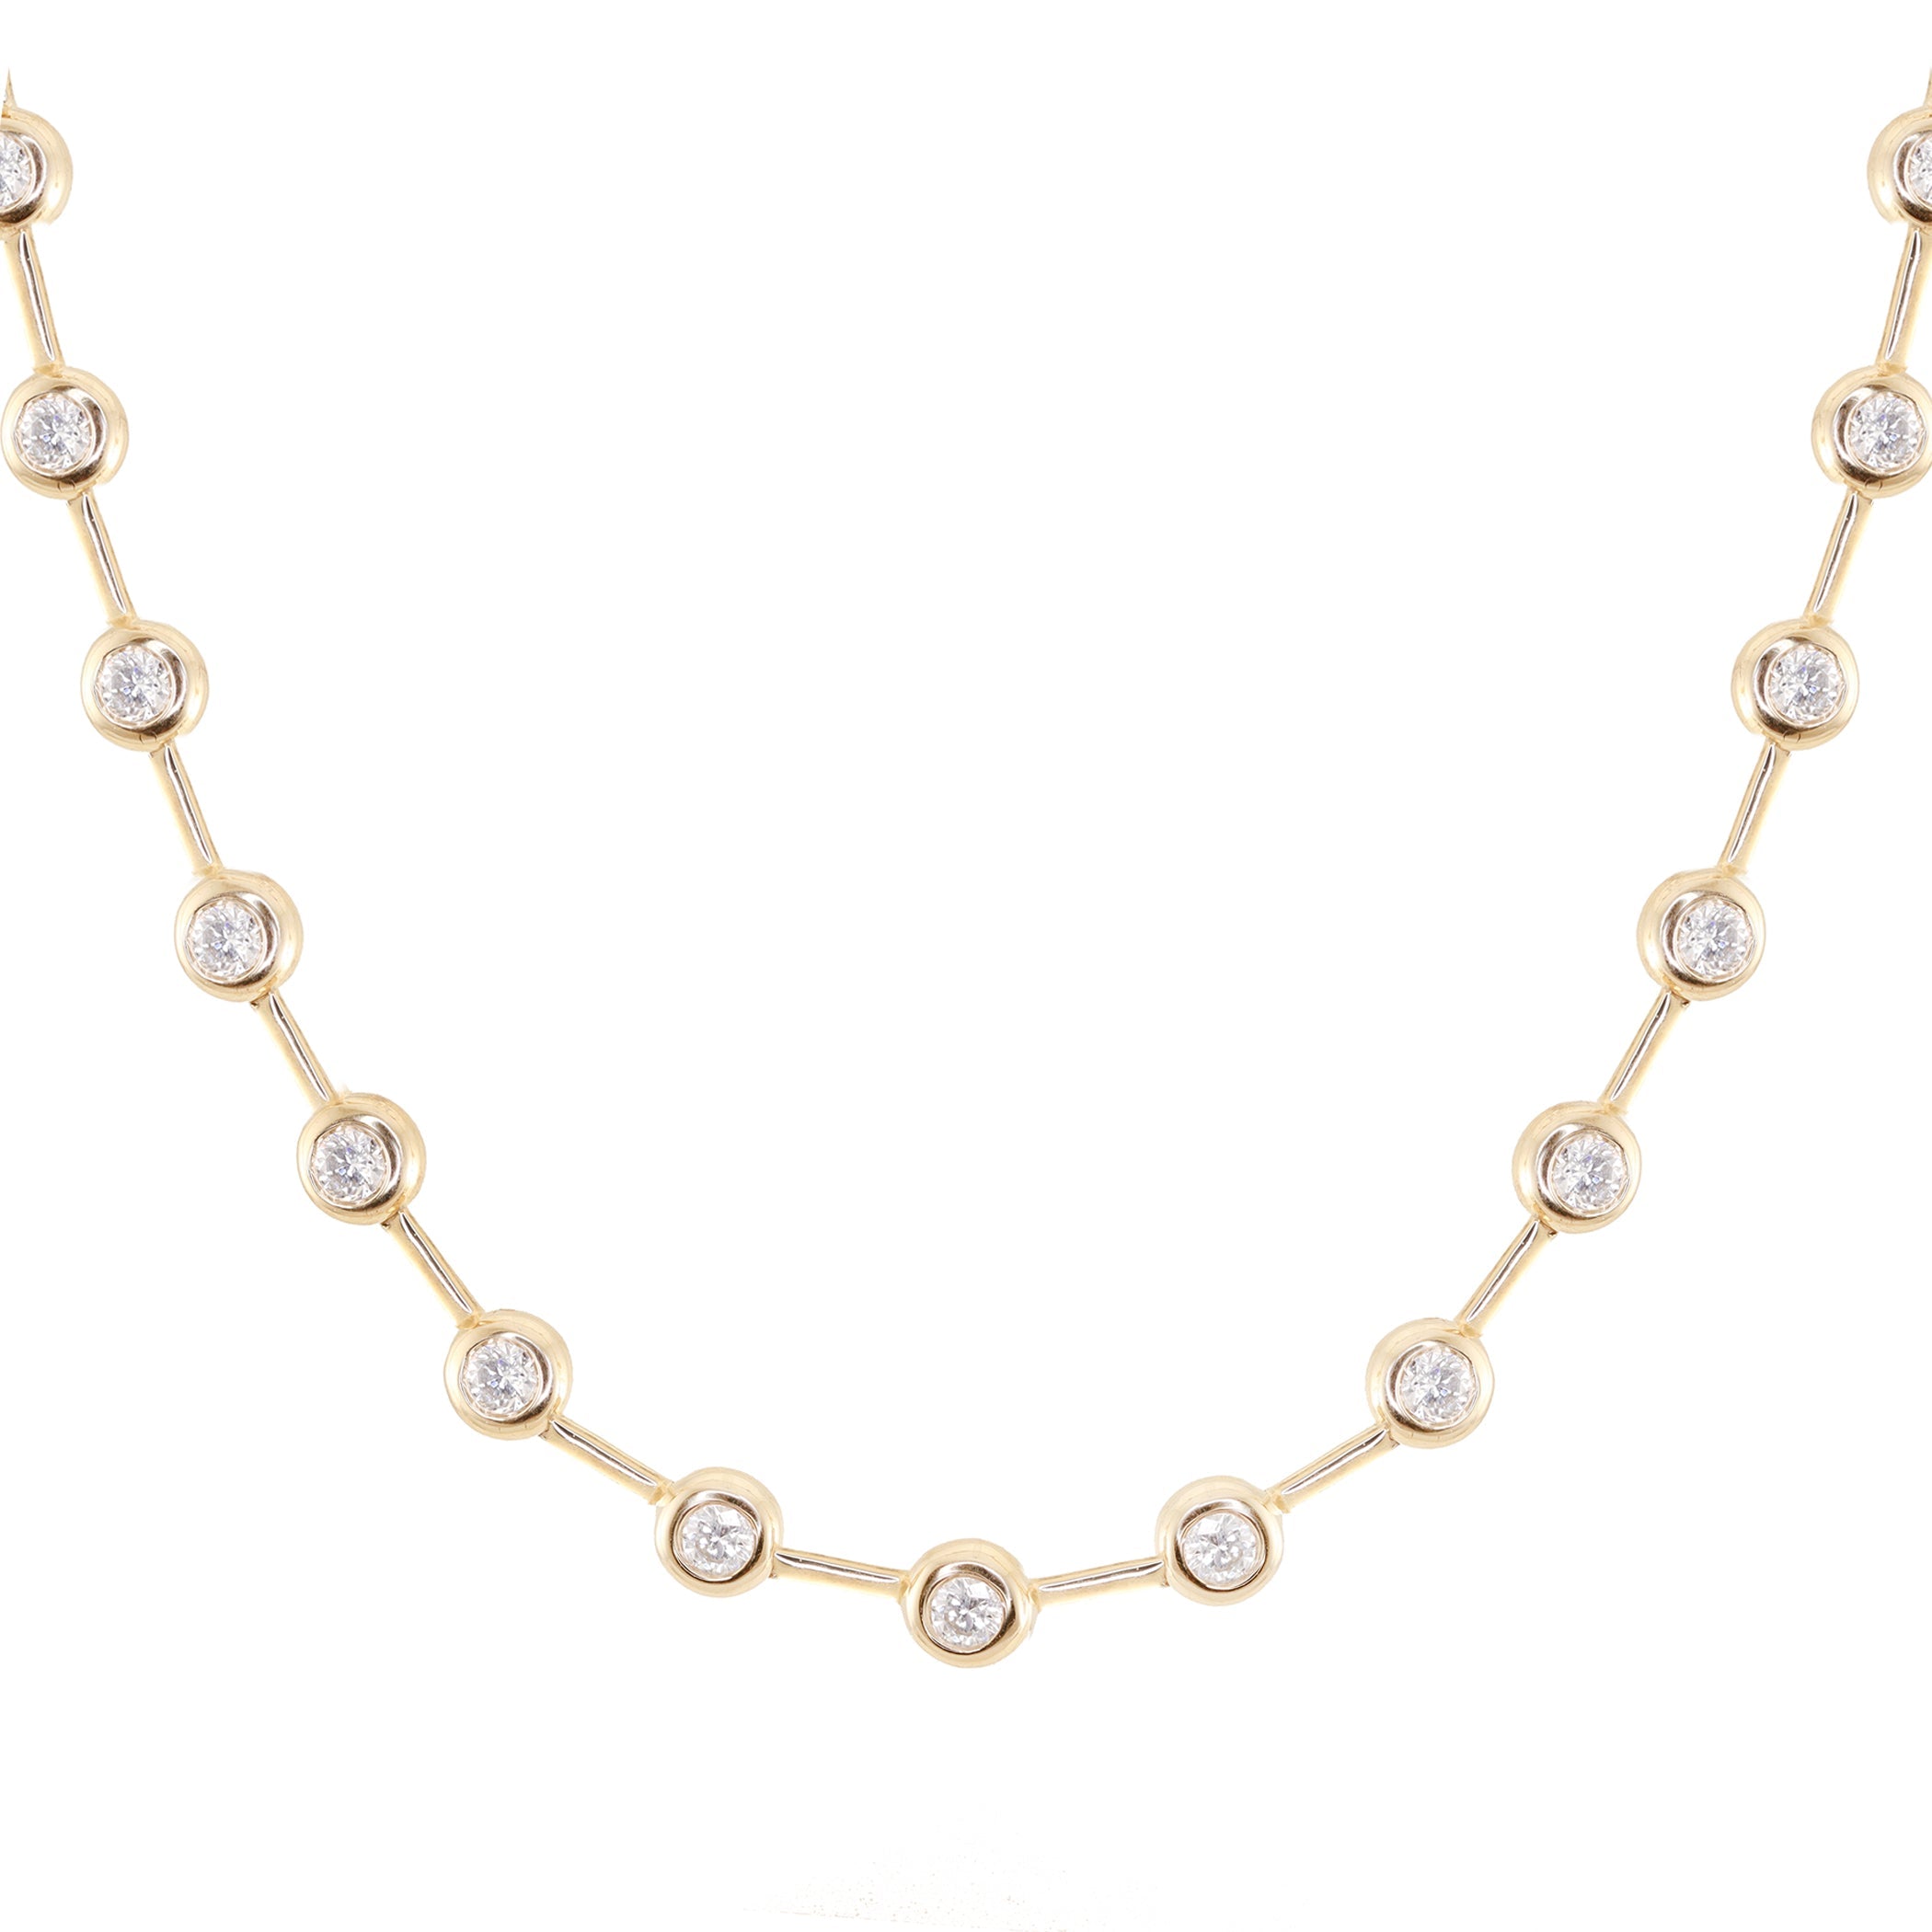 14K Solid Yellow Gold 7.00 Carat Diamond Tennis Necklace – LTB JEWELRY